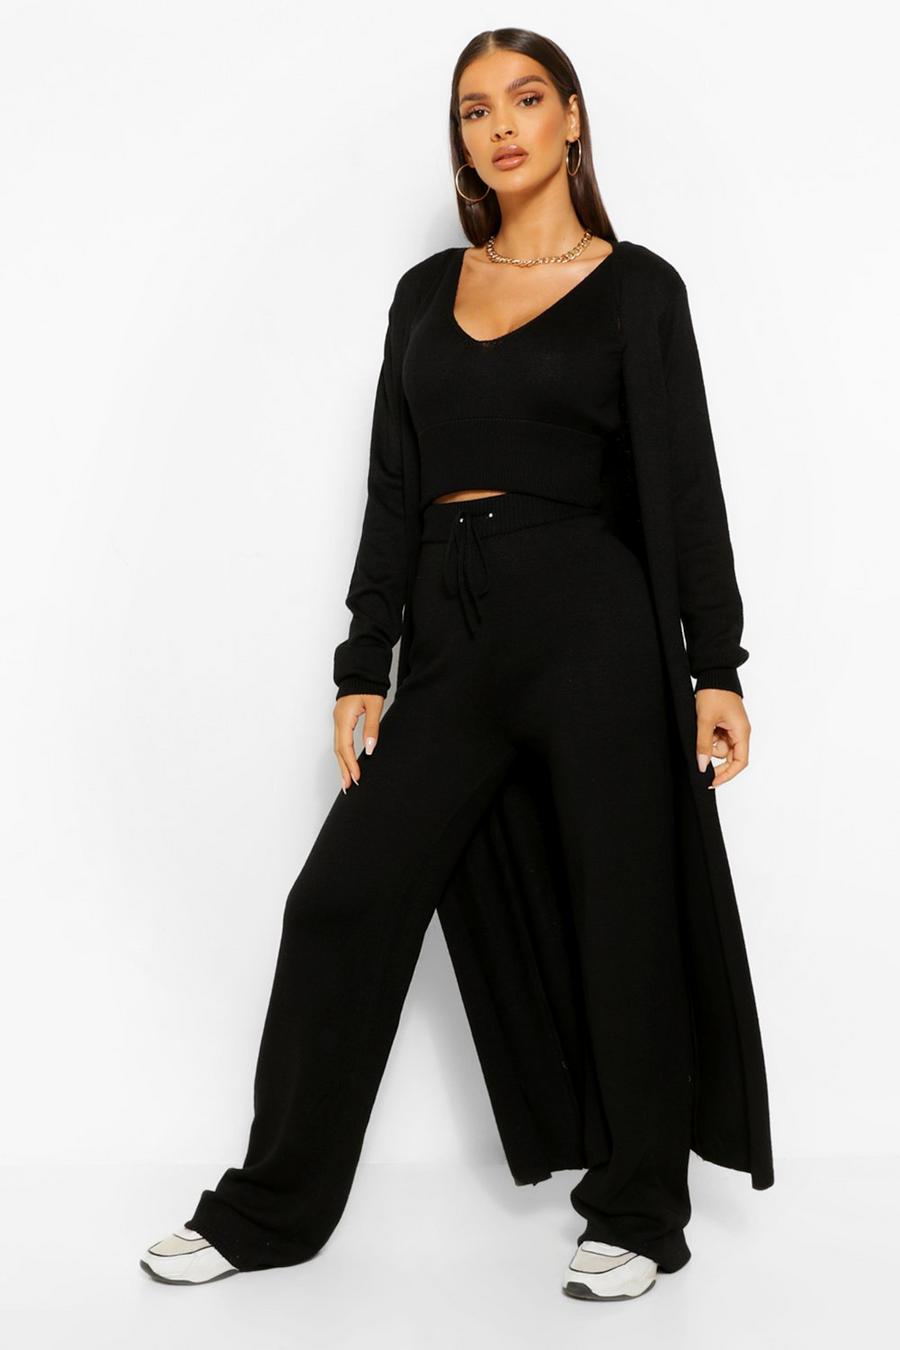 3 Piece Knitted Top Cardigan And Legging Co-ord Set, Black image number 1